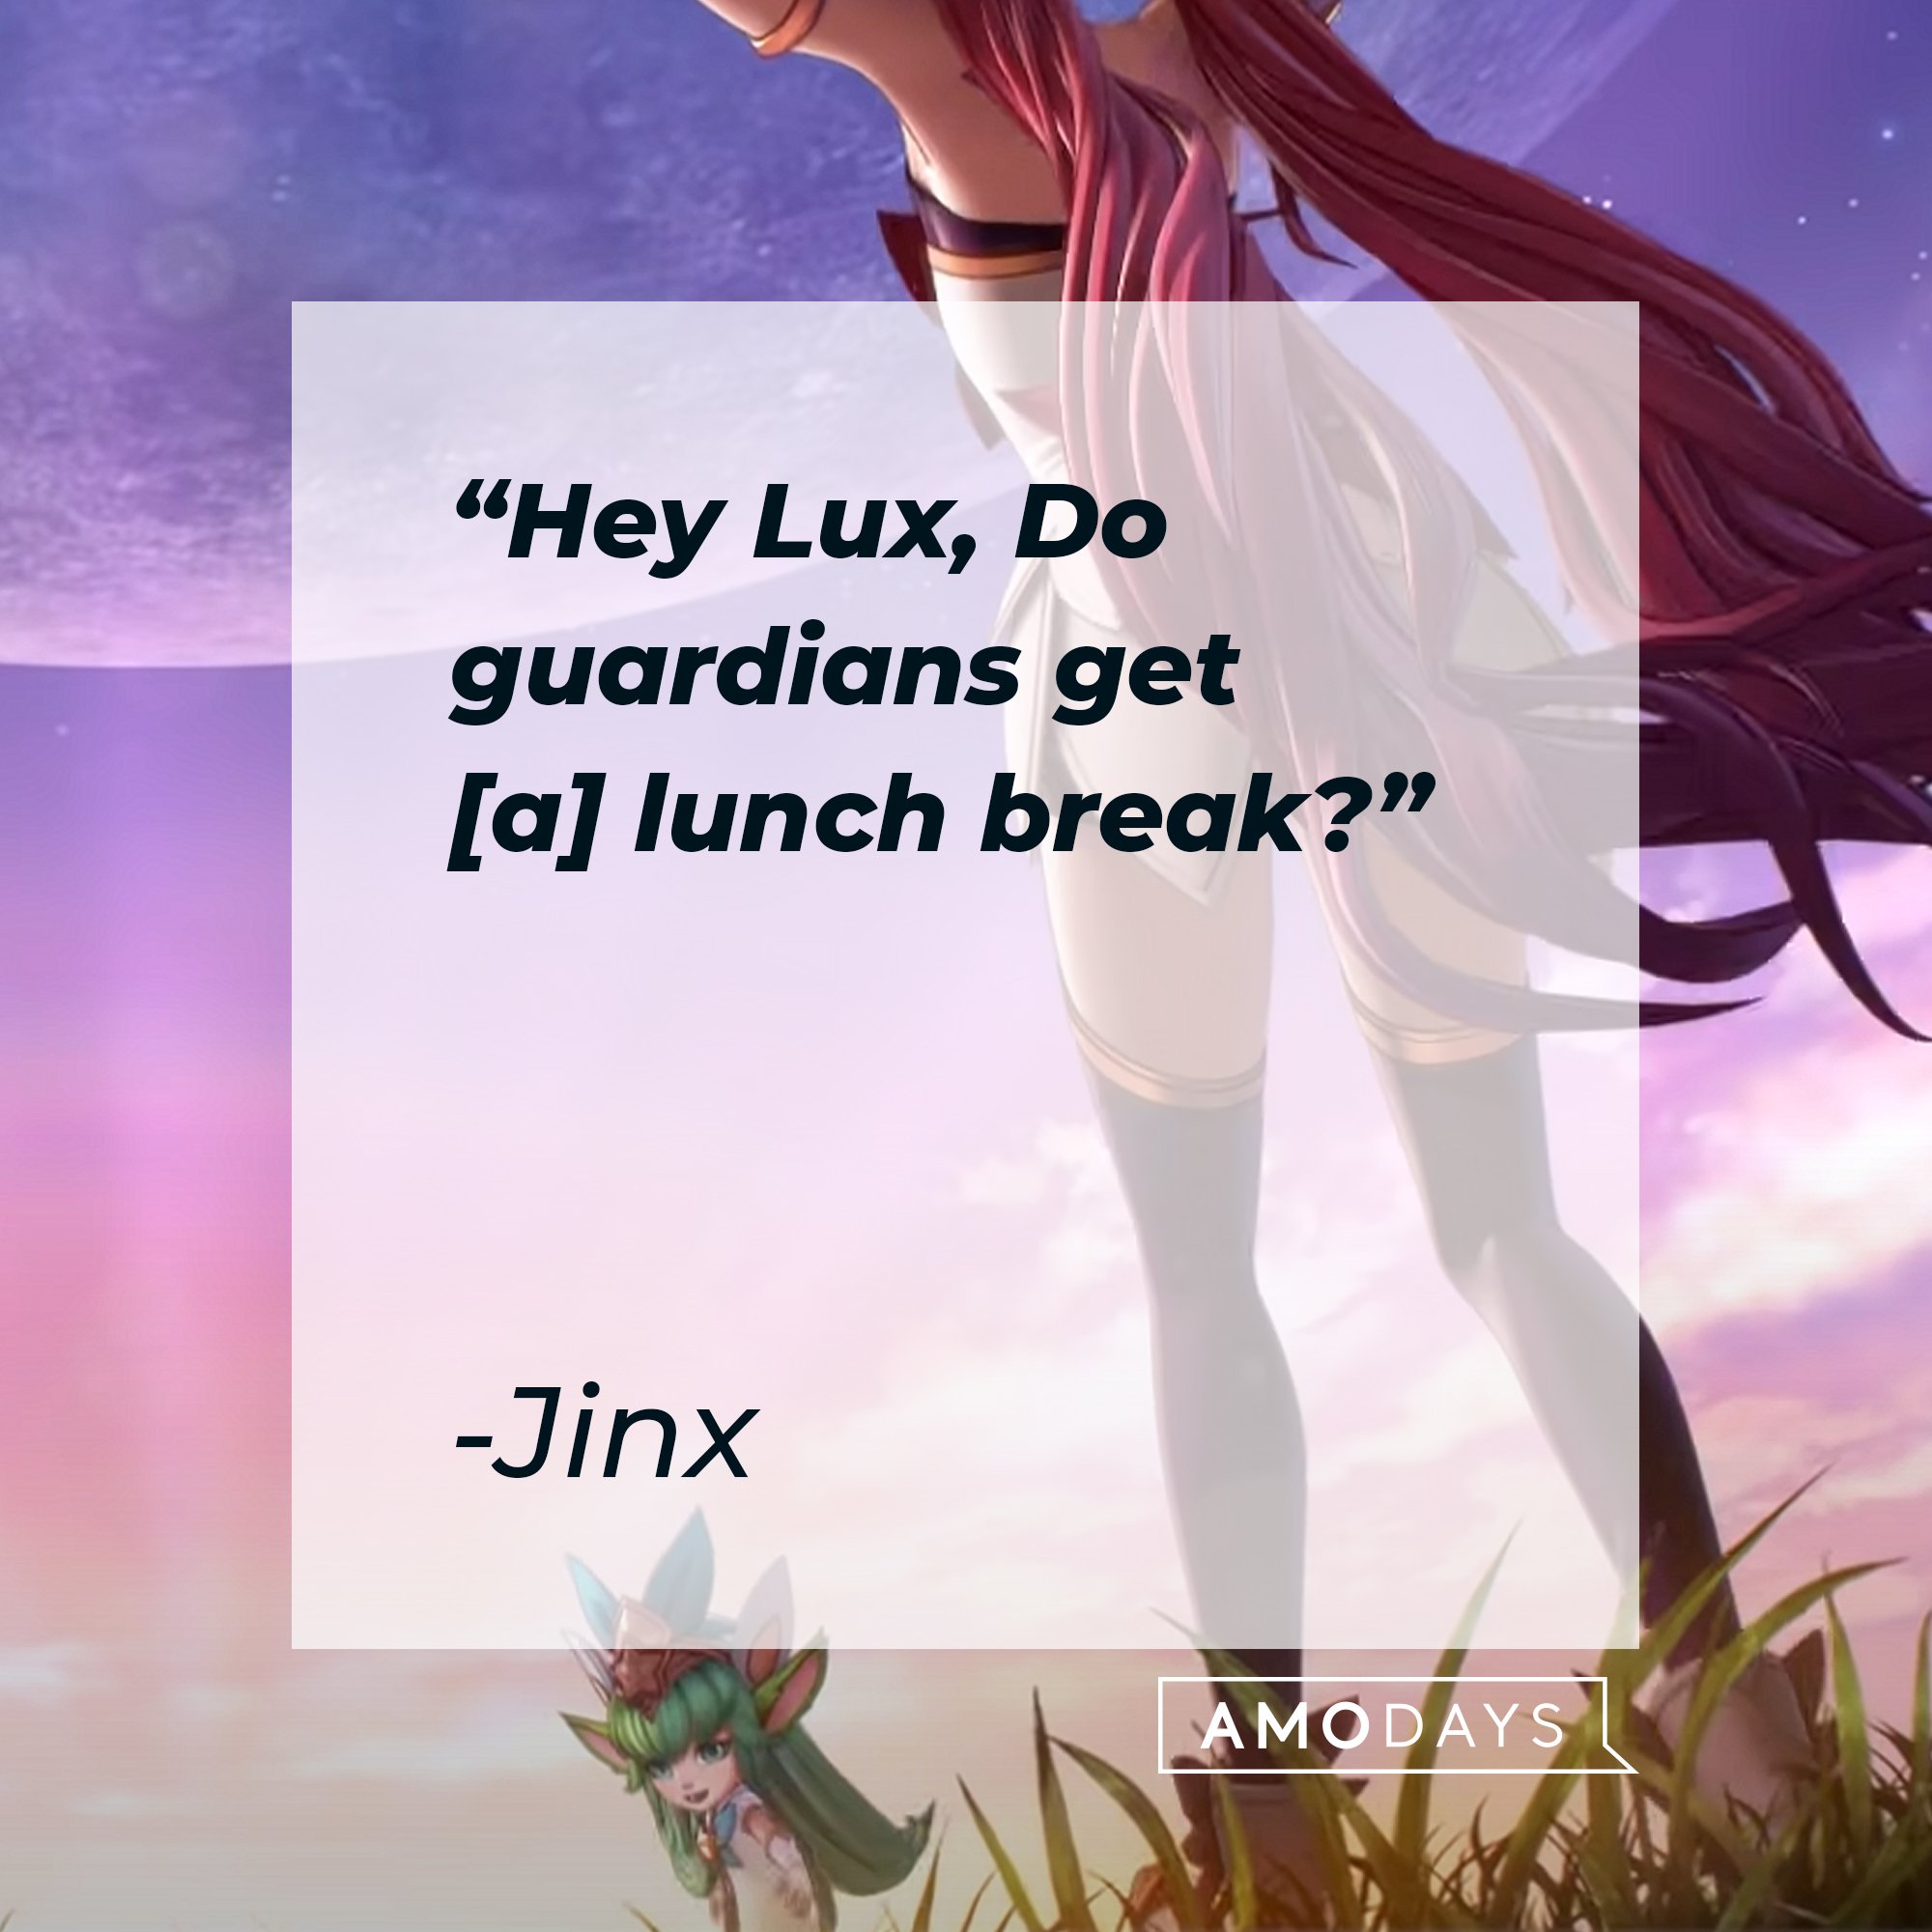 Jinx's quote: "Hey Lux, Do guardians get [a] lunch break?" | Image: AmoDays